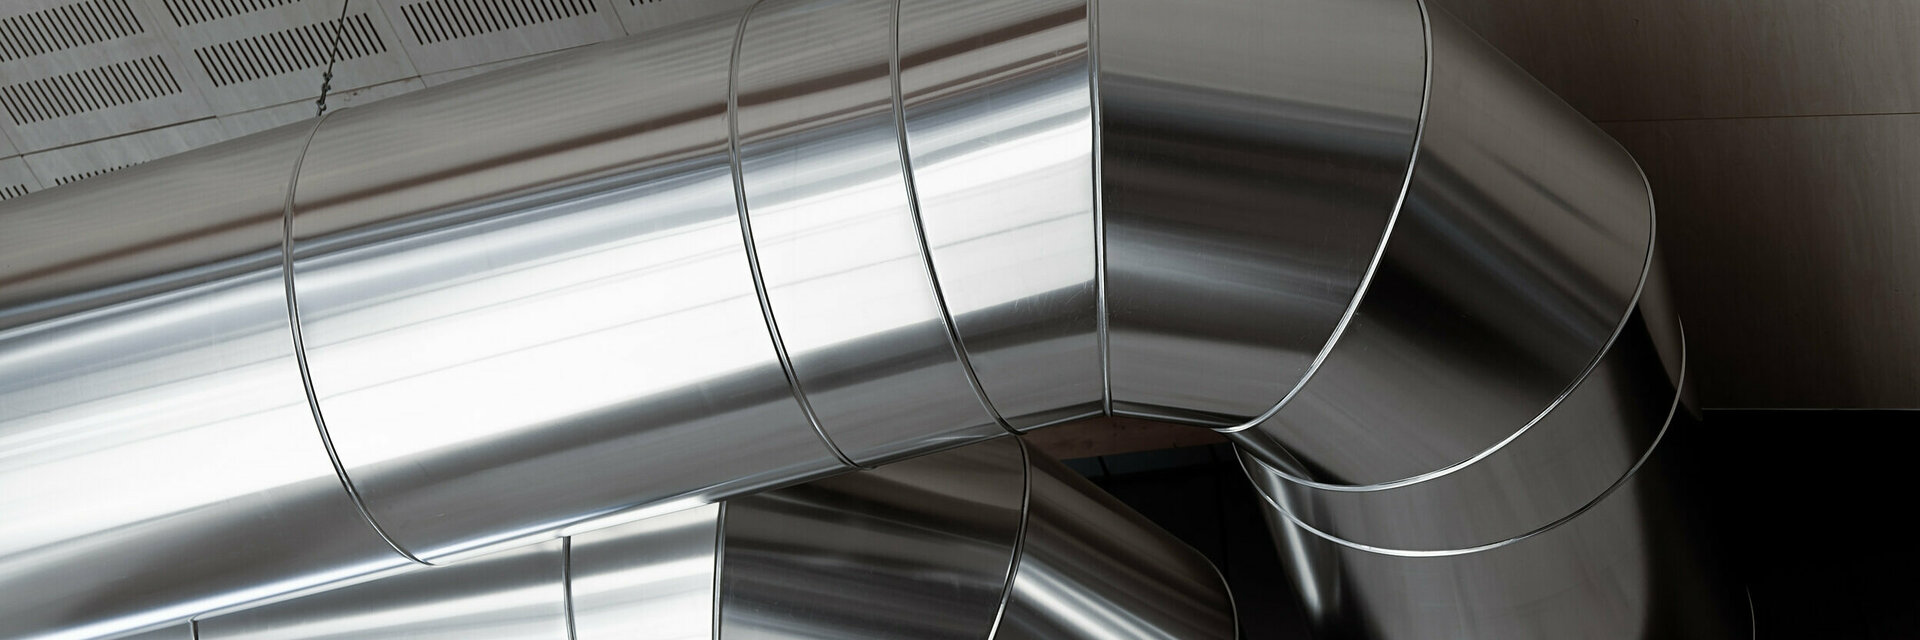 Big Heating Ducts in a Industrial Building Interior 162545431